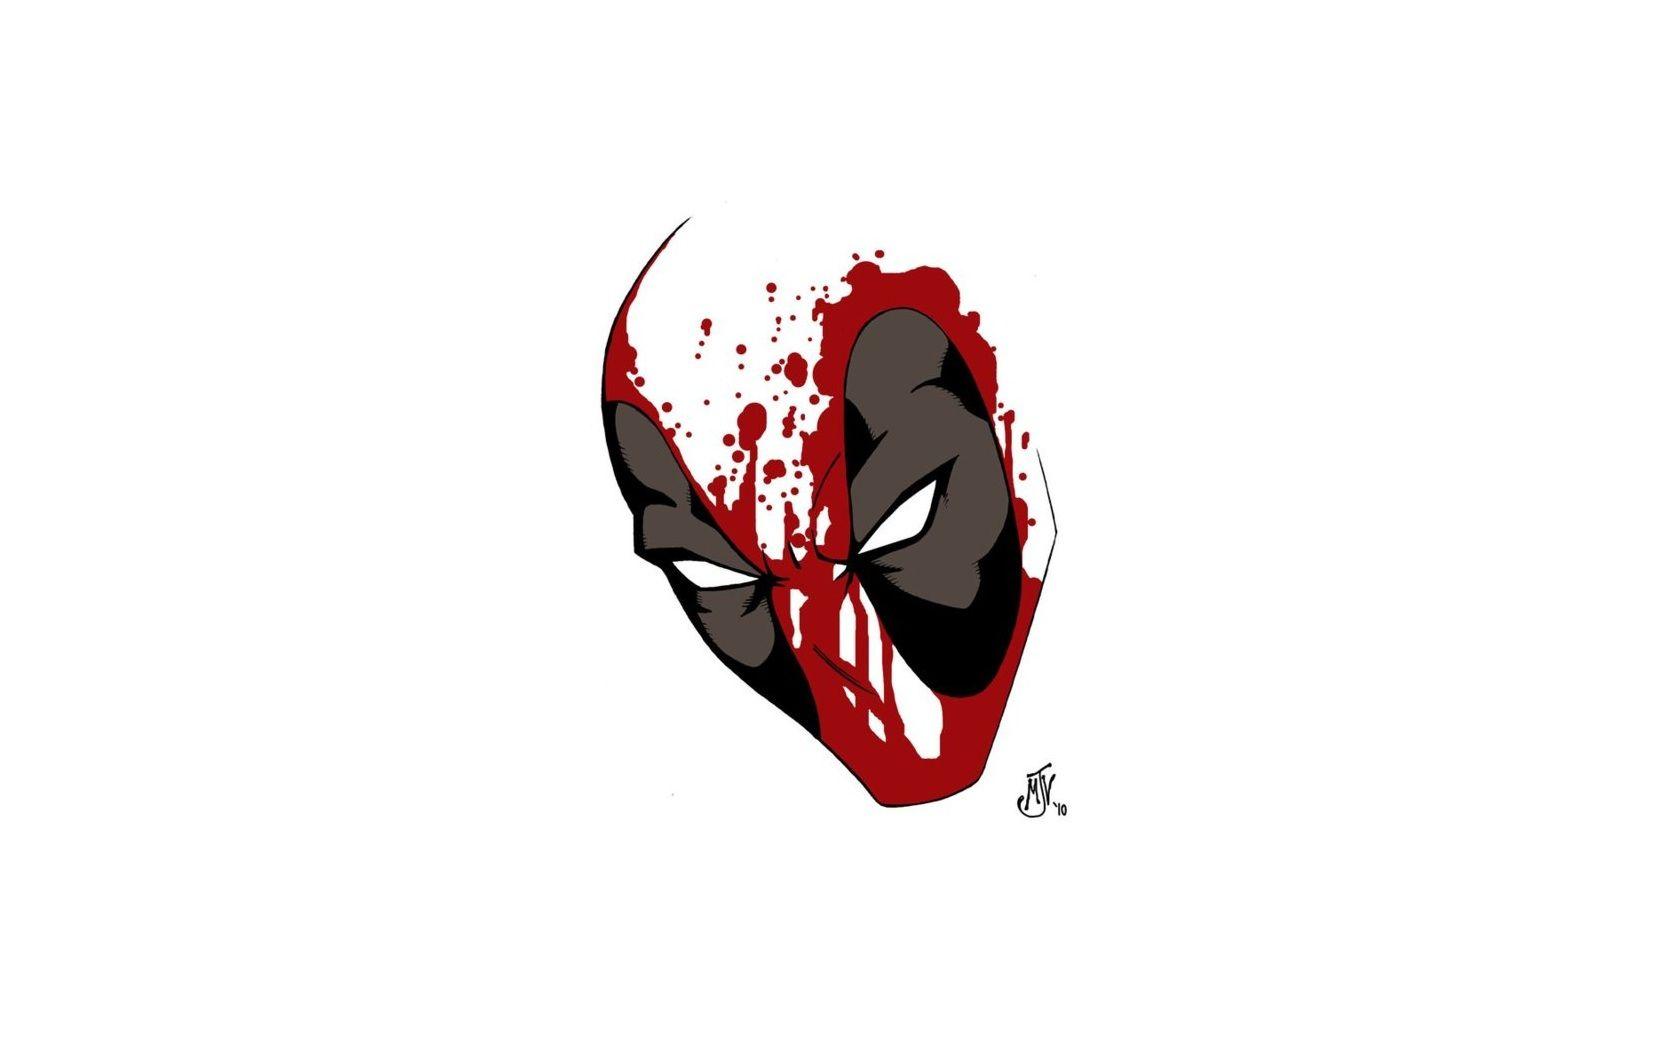 You guys want some Deadpool wallpaper?